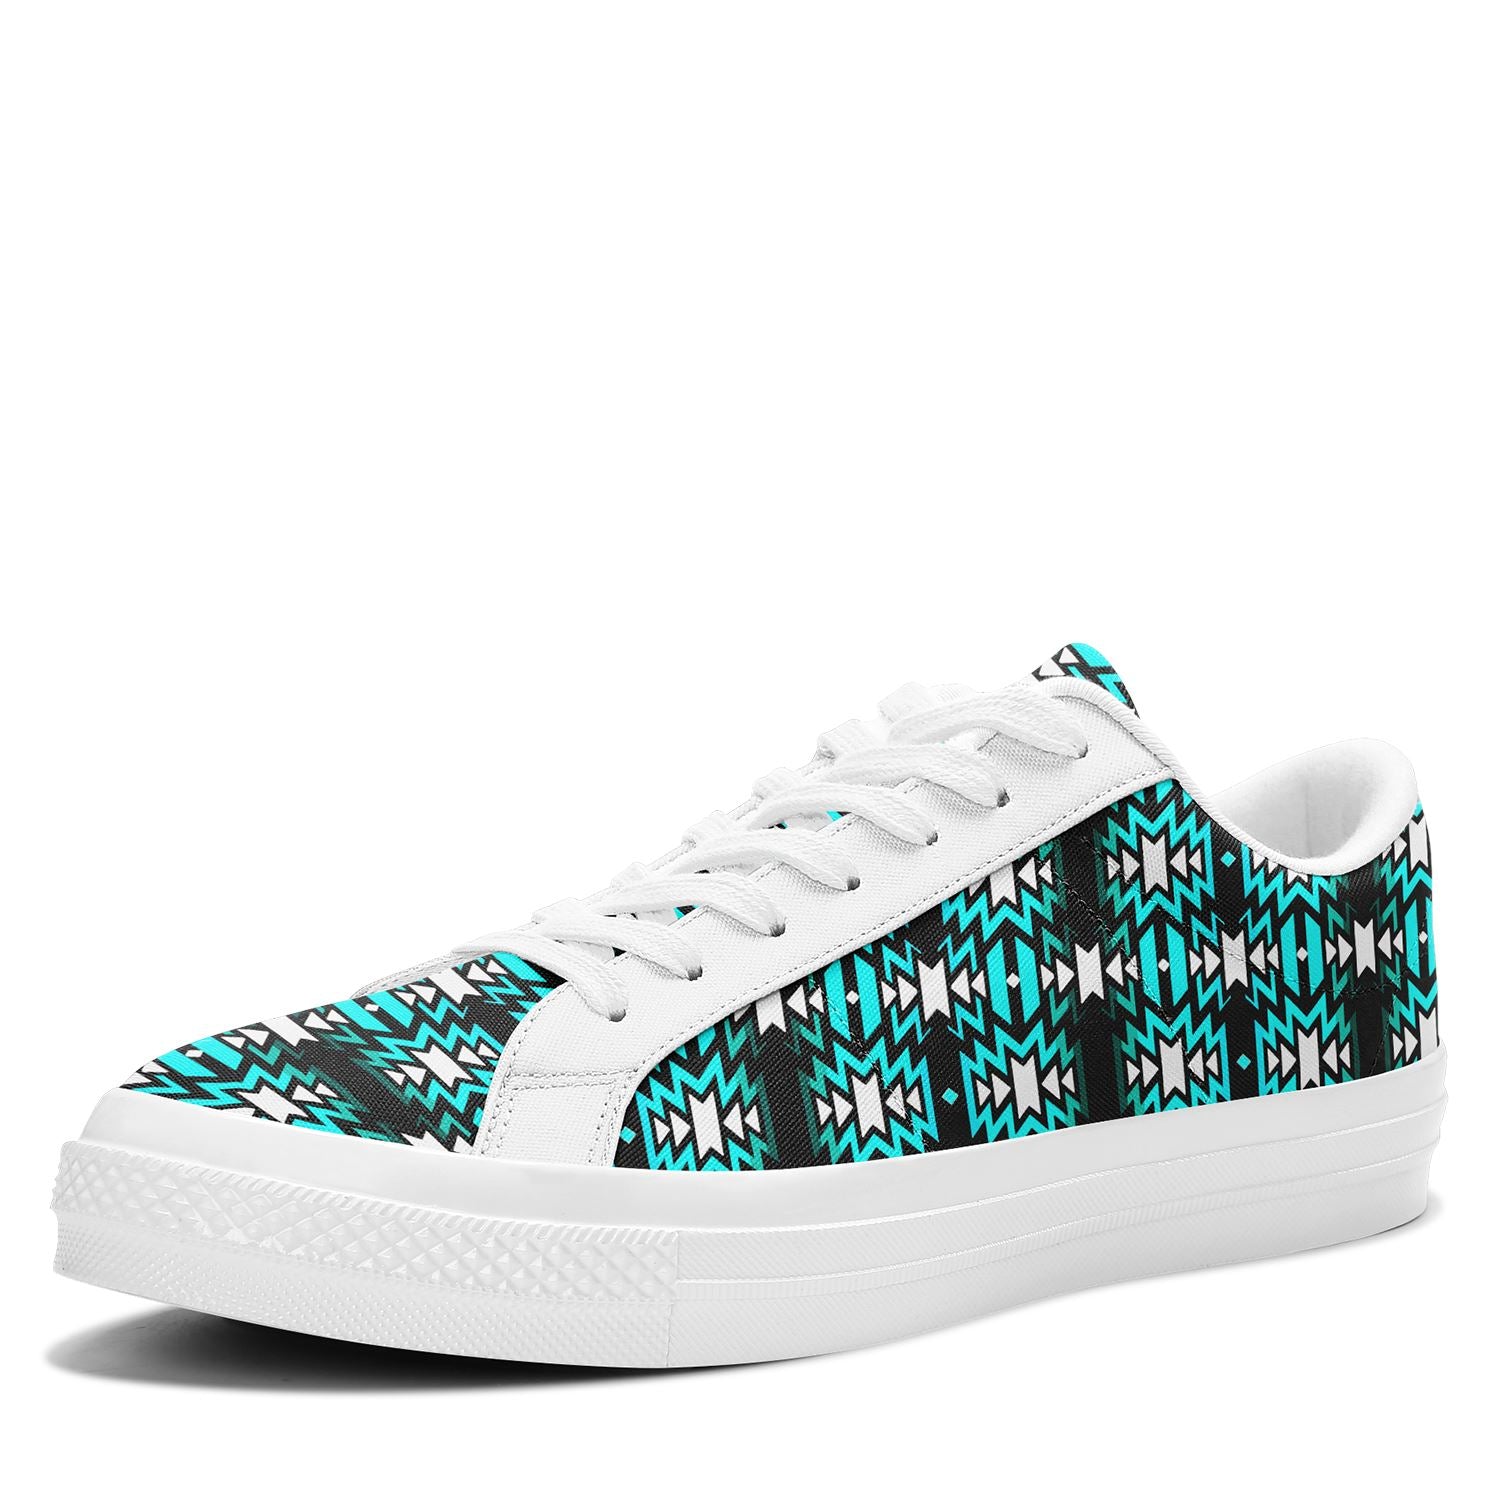 Black Fire Firefly Aapisi Low Top Canvas Shoes White Sole 49 Dzine 